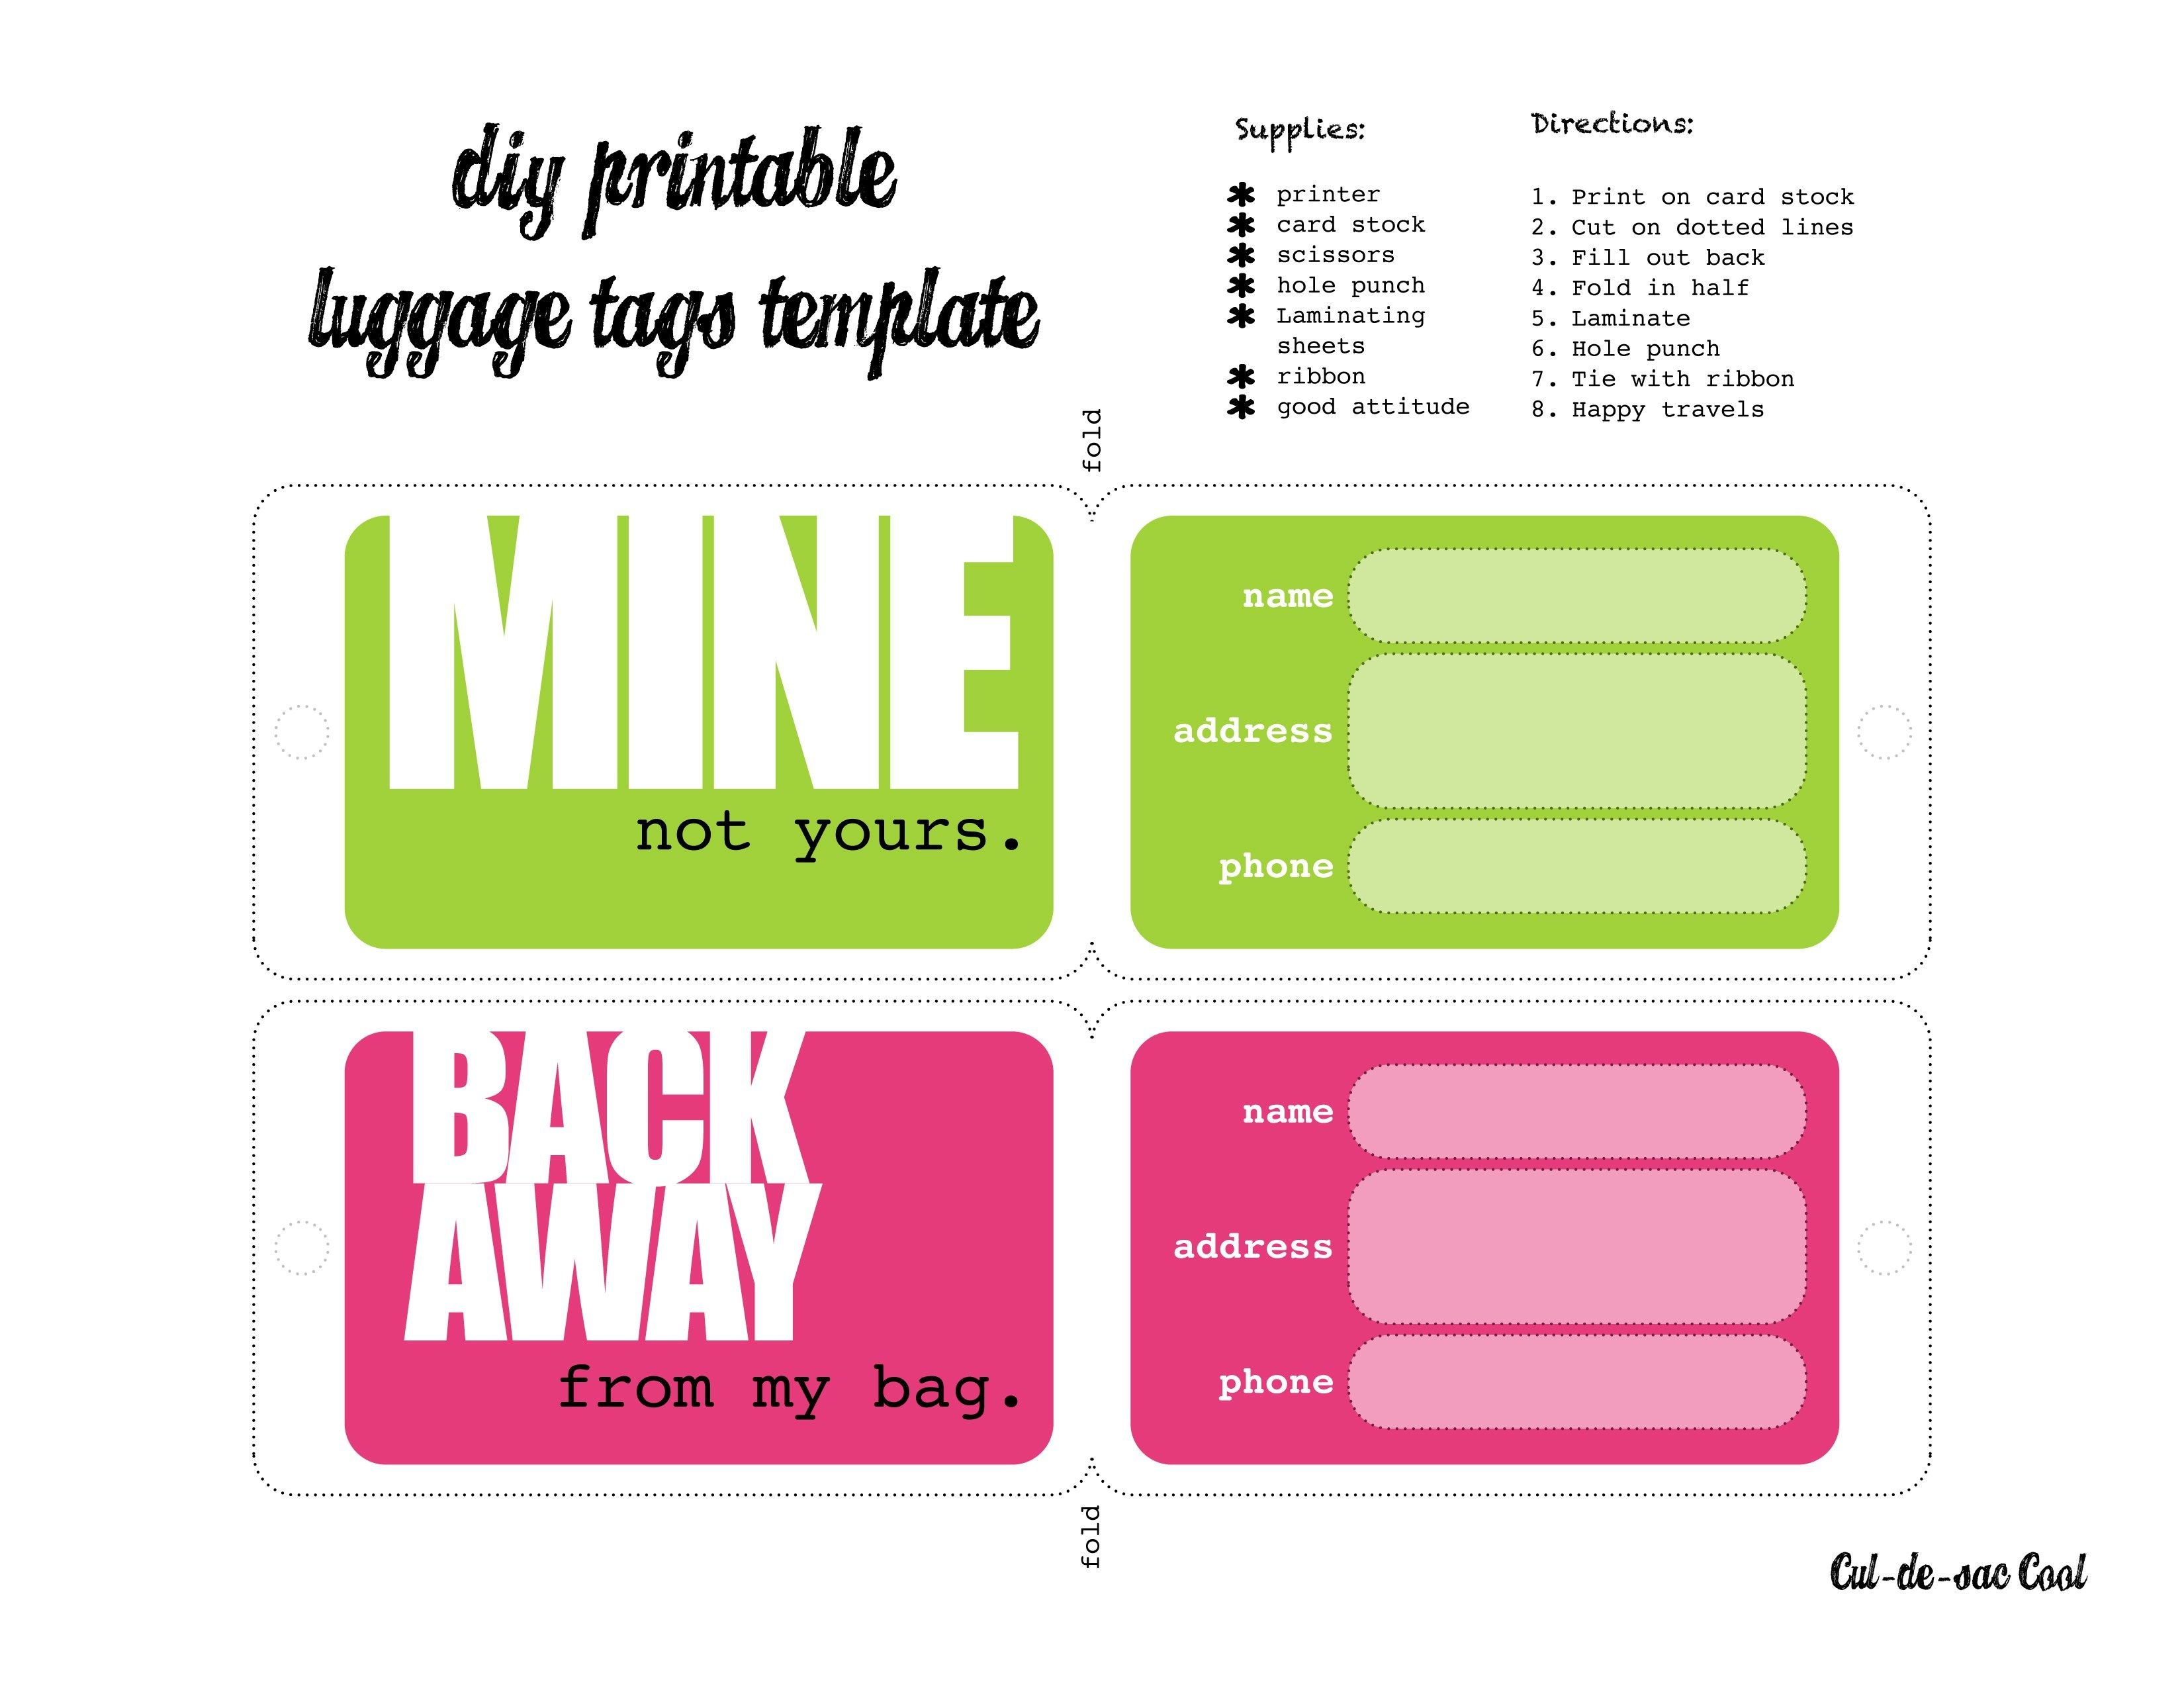 Luggage Tags Template  לונדון  Luggage Tag Template Funny Luggage throughout Blank Luggage Tag Template